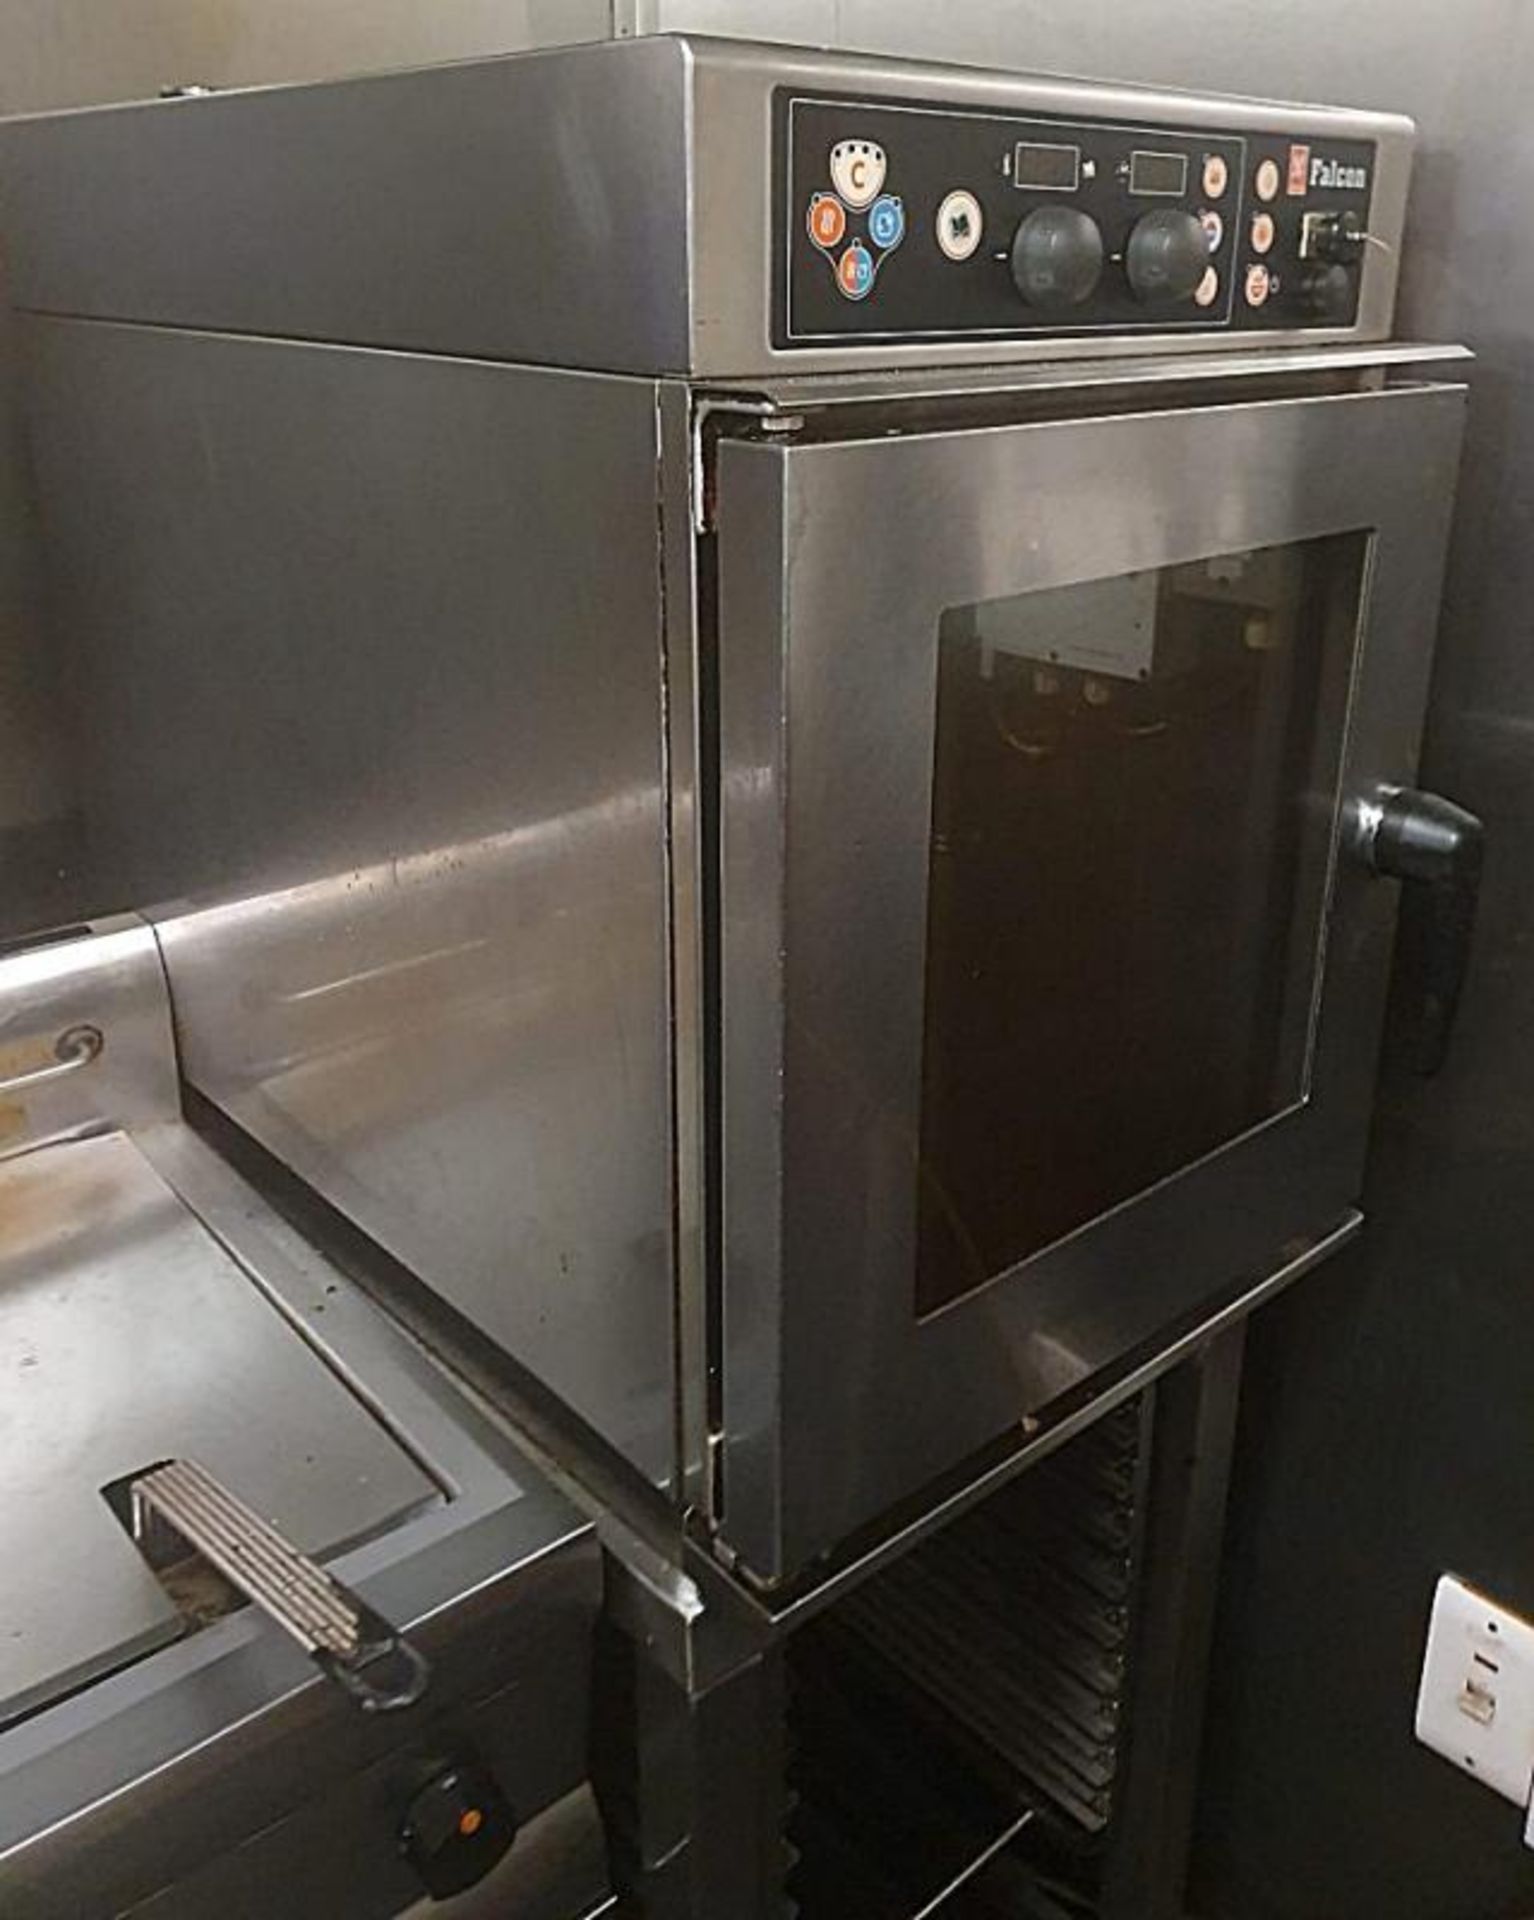 1 x FALCON Commercial 6-Grid Electric Combi Oven In Stainless Steel - Dimensions: 51 x 80 x H73cm + - Image 2 of 4